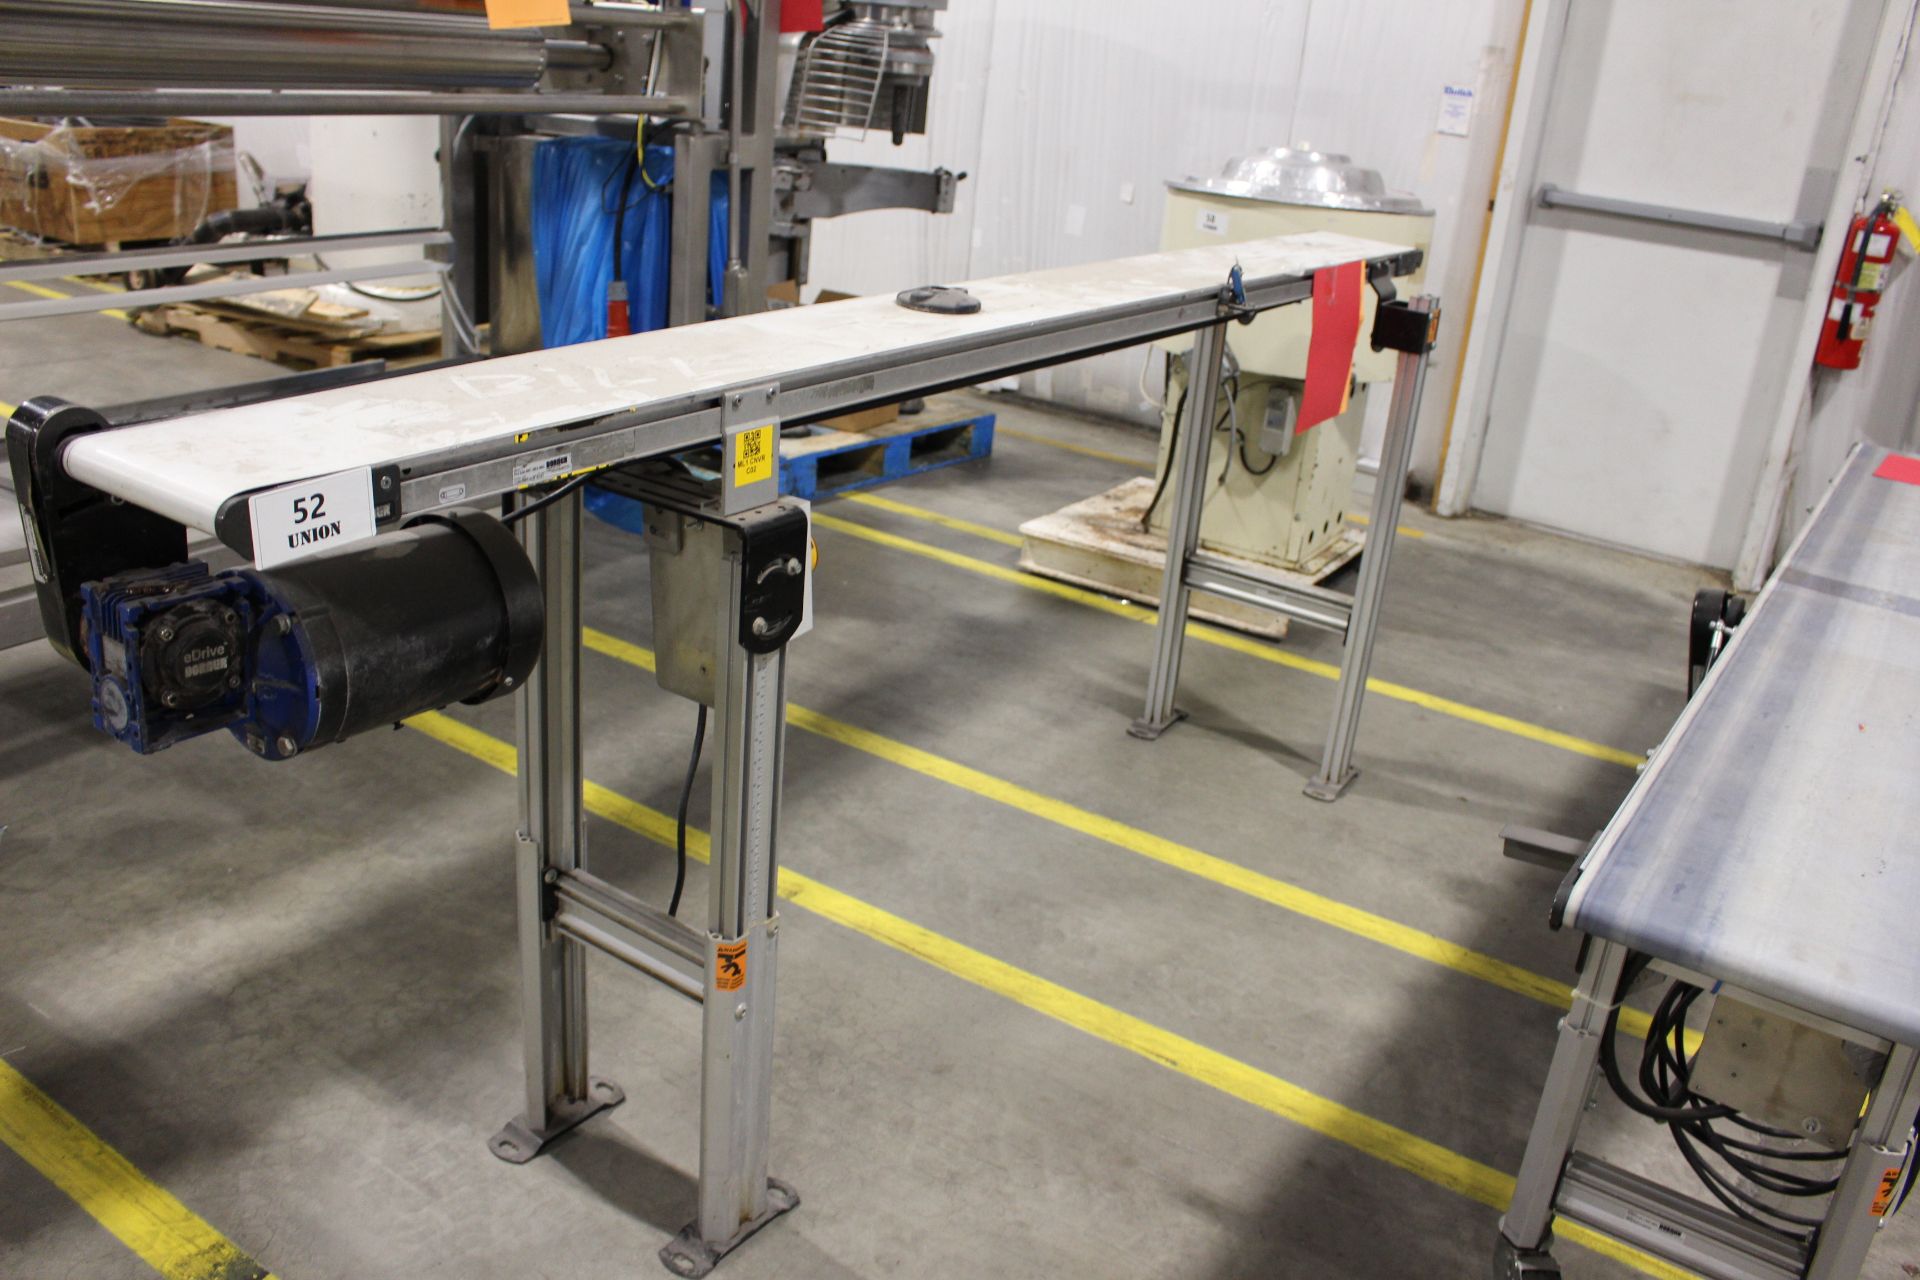 Asset 52 - Dorner 8" wide x 96" long x 40.5" tall Conveyor on casters. 3 phase, 60 cycle, 230/460